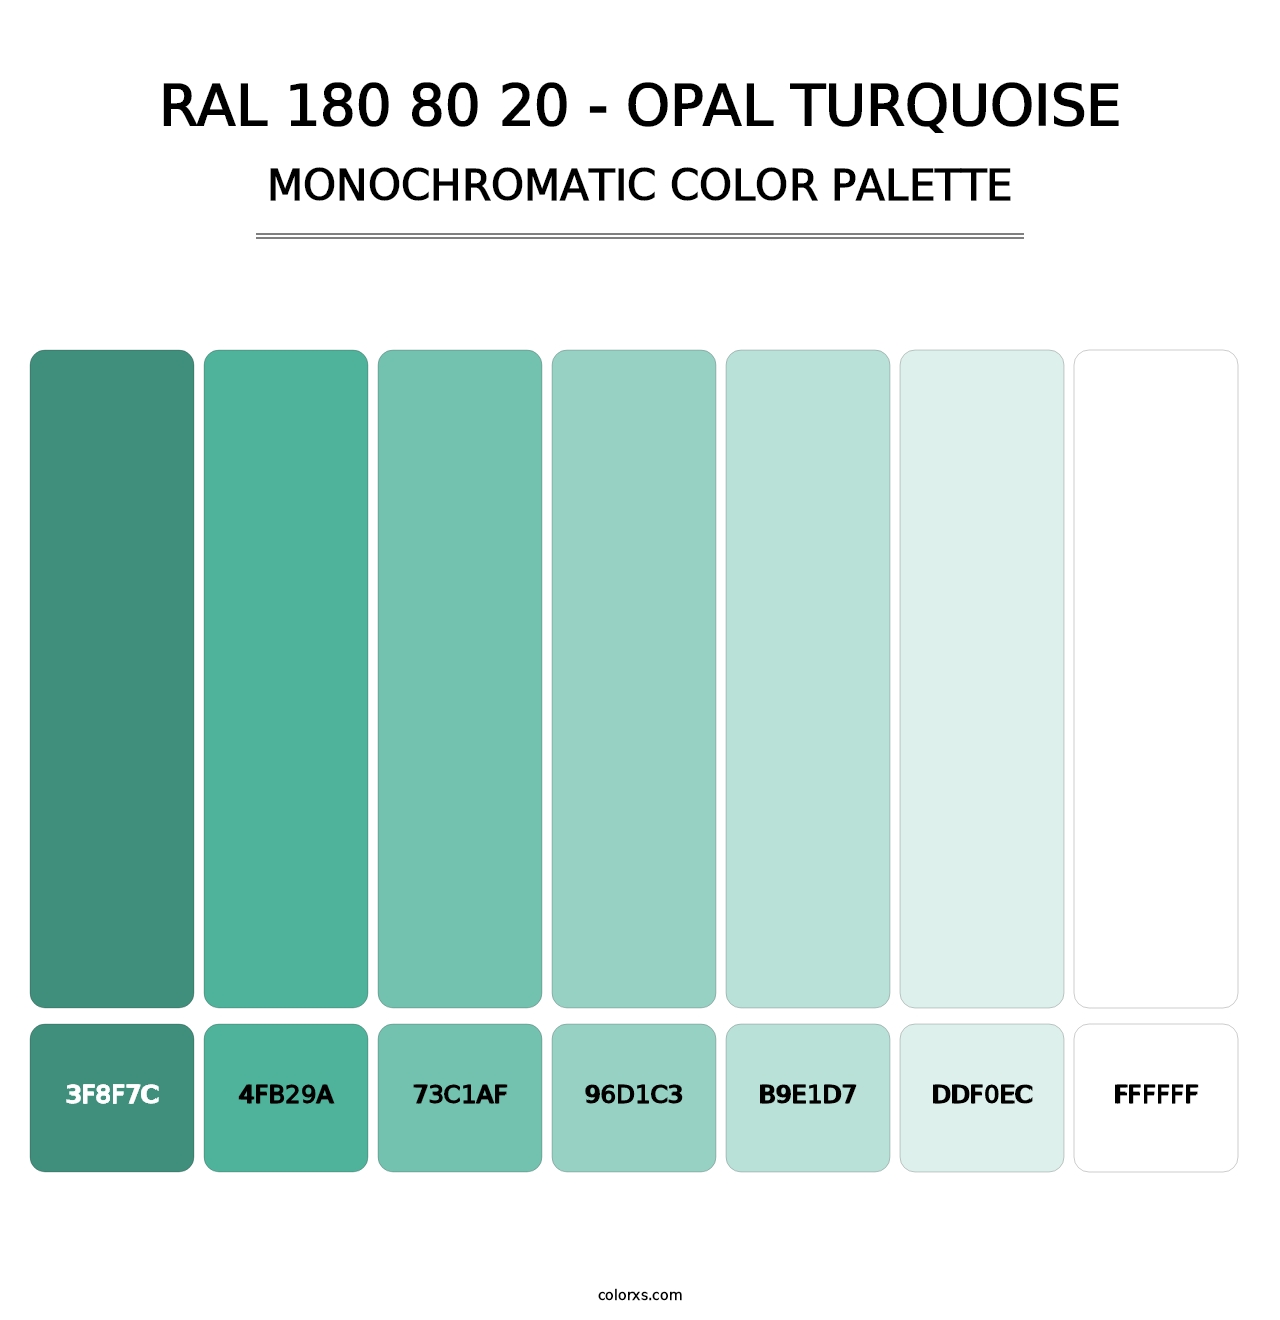 RAL 180 80 20 - Opal Turquoise - Monochromatic Color Palette